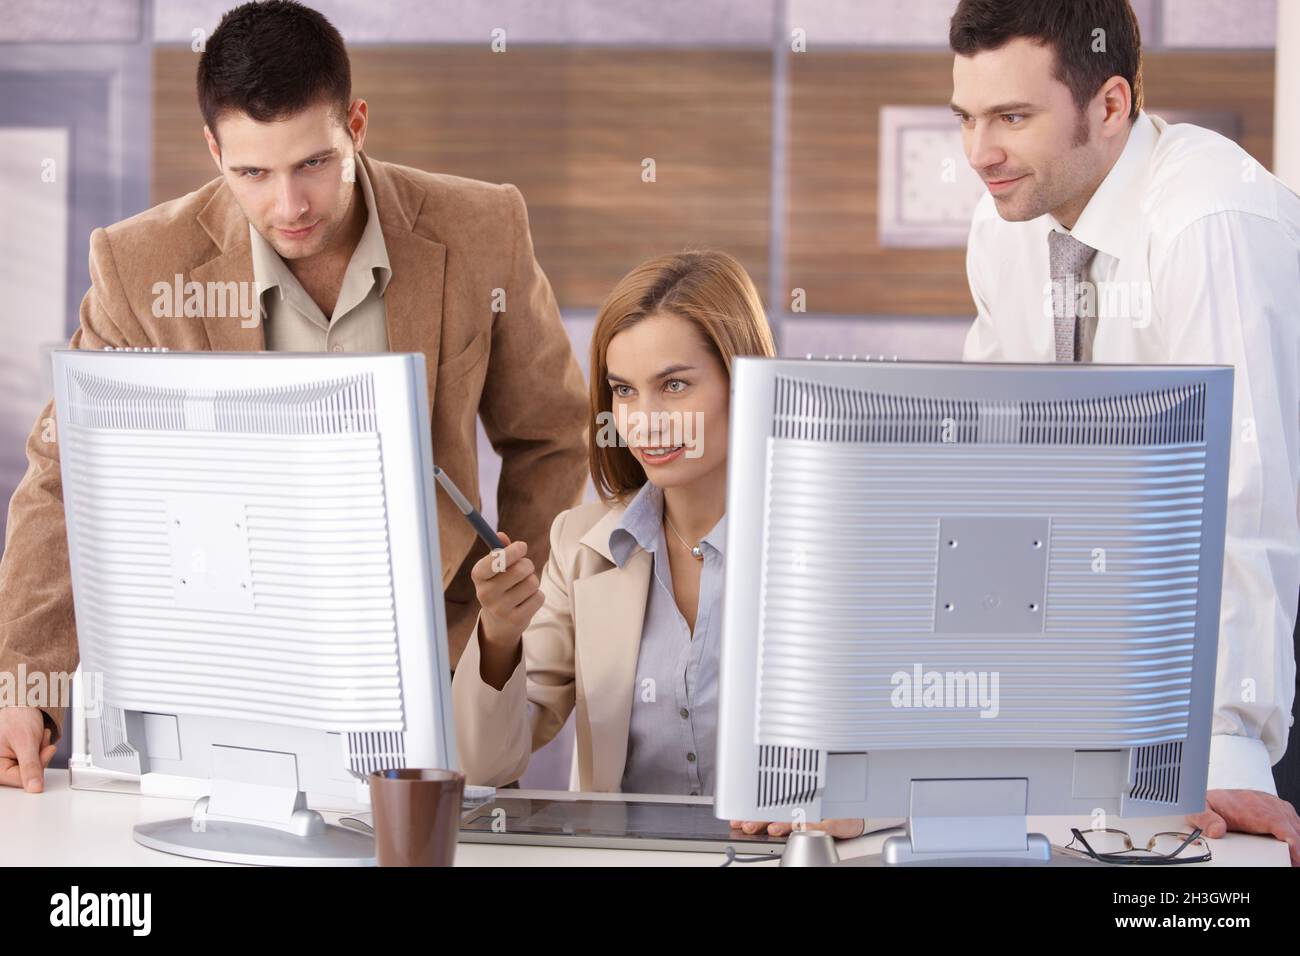 Young team learning computer graphic design Stock Photo